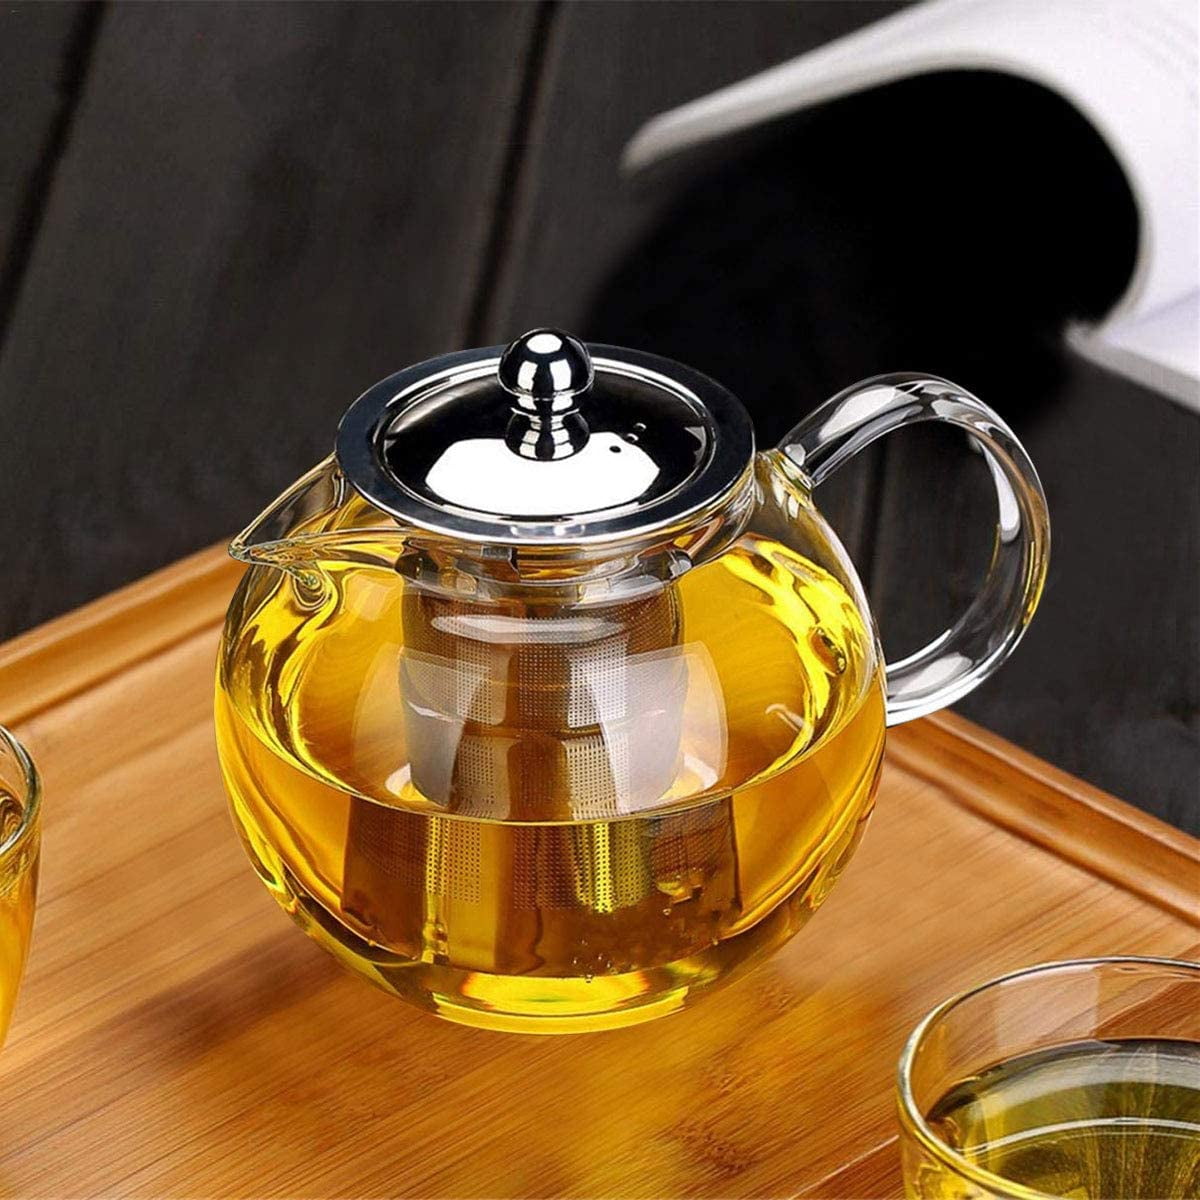 Unbreakable Glass teapot,1350ml/46oz Glass Teapot with Removable Infuser and Lid,Stovetop Safe Tea Kettle,Blooming and Loose Leaf Tea Maker